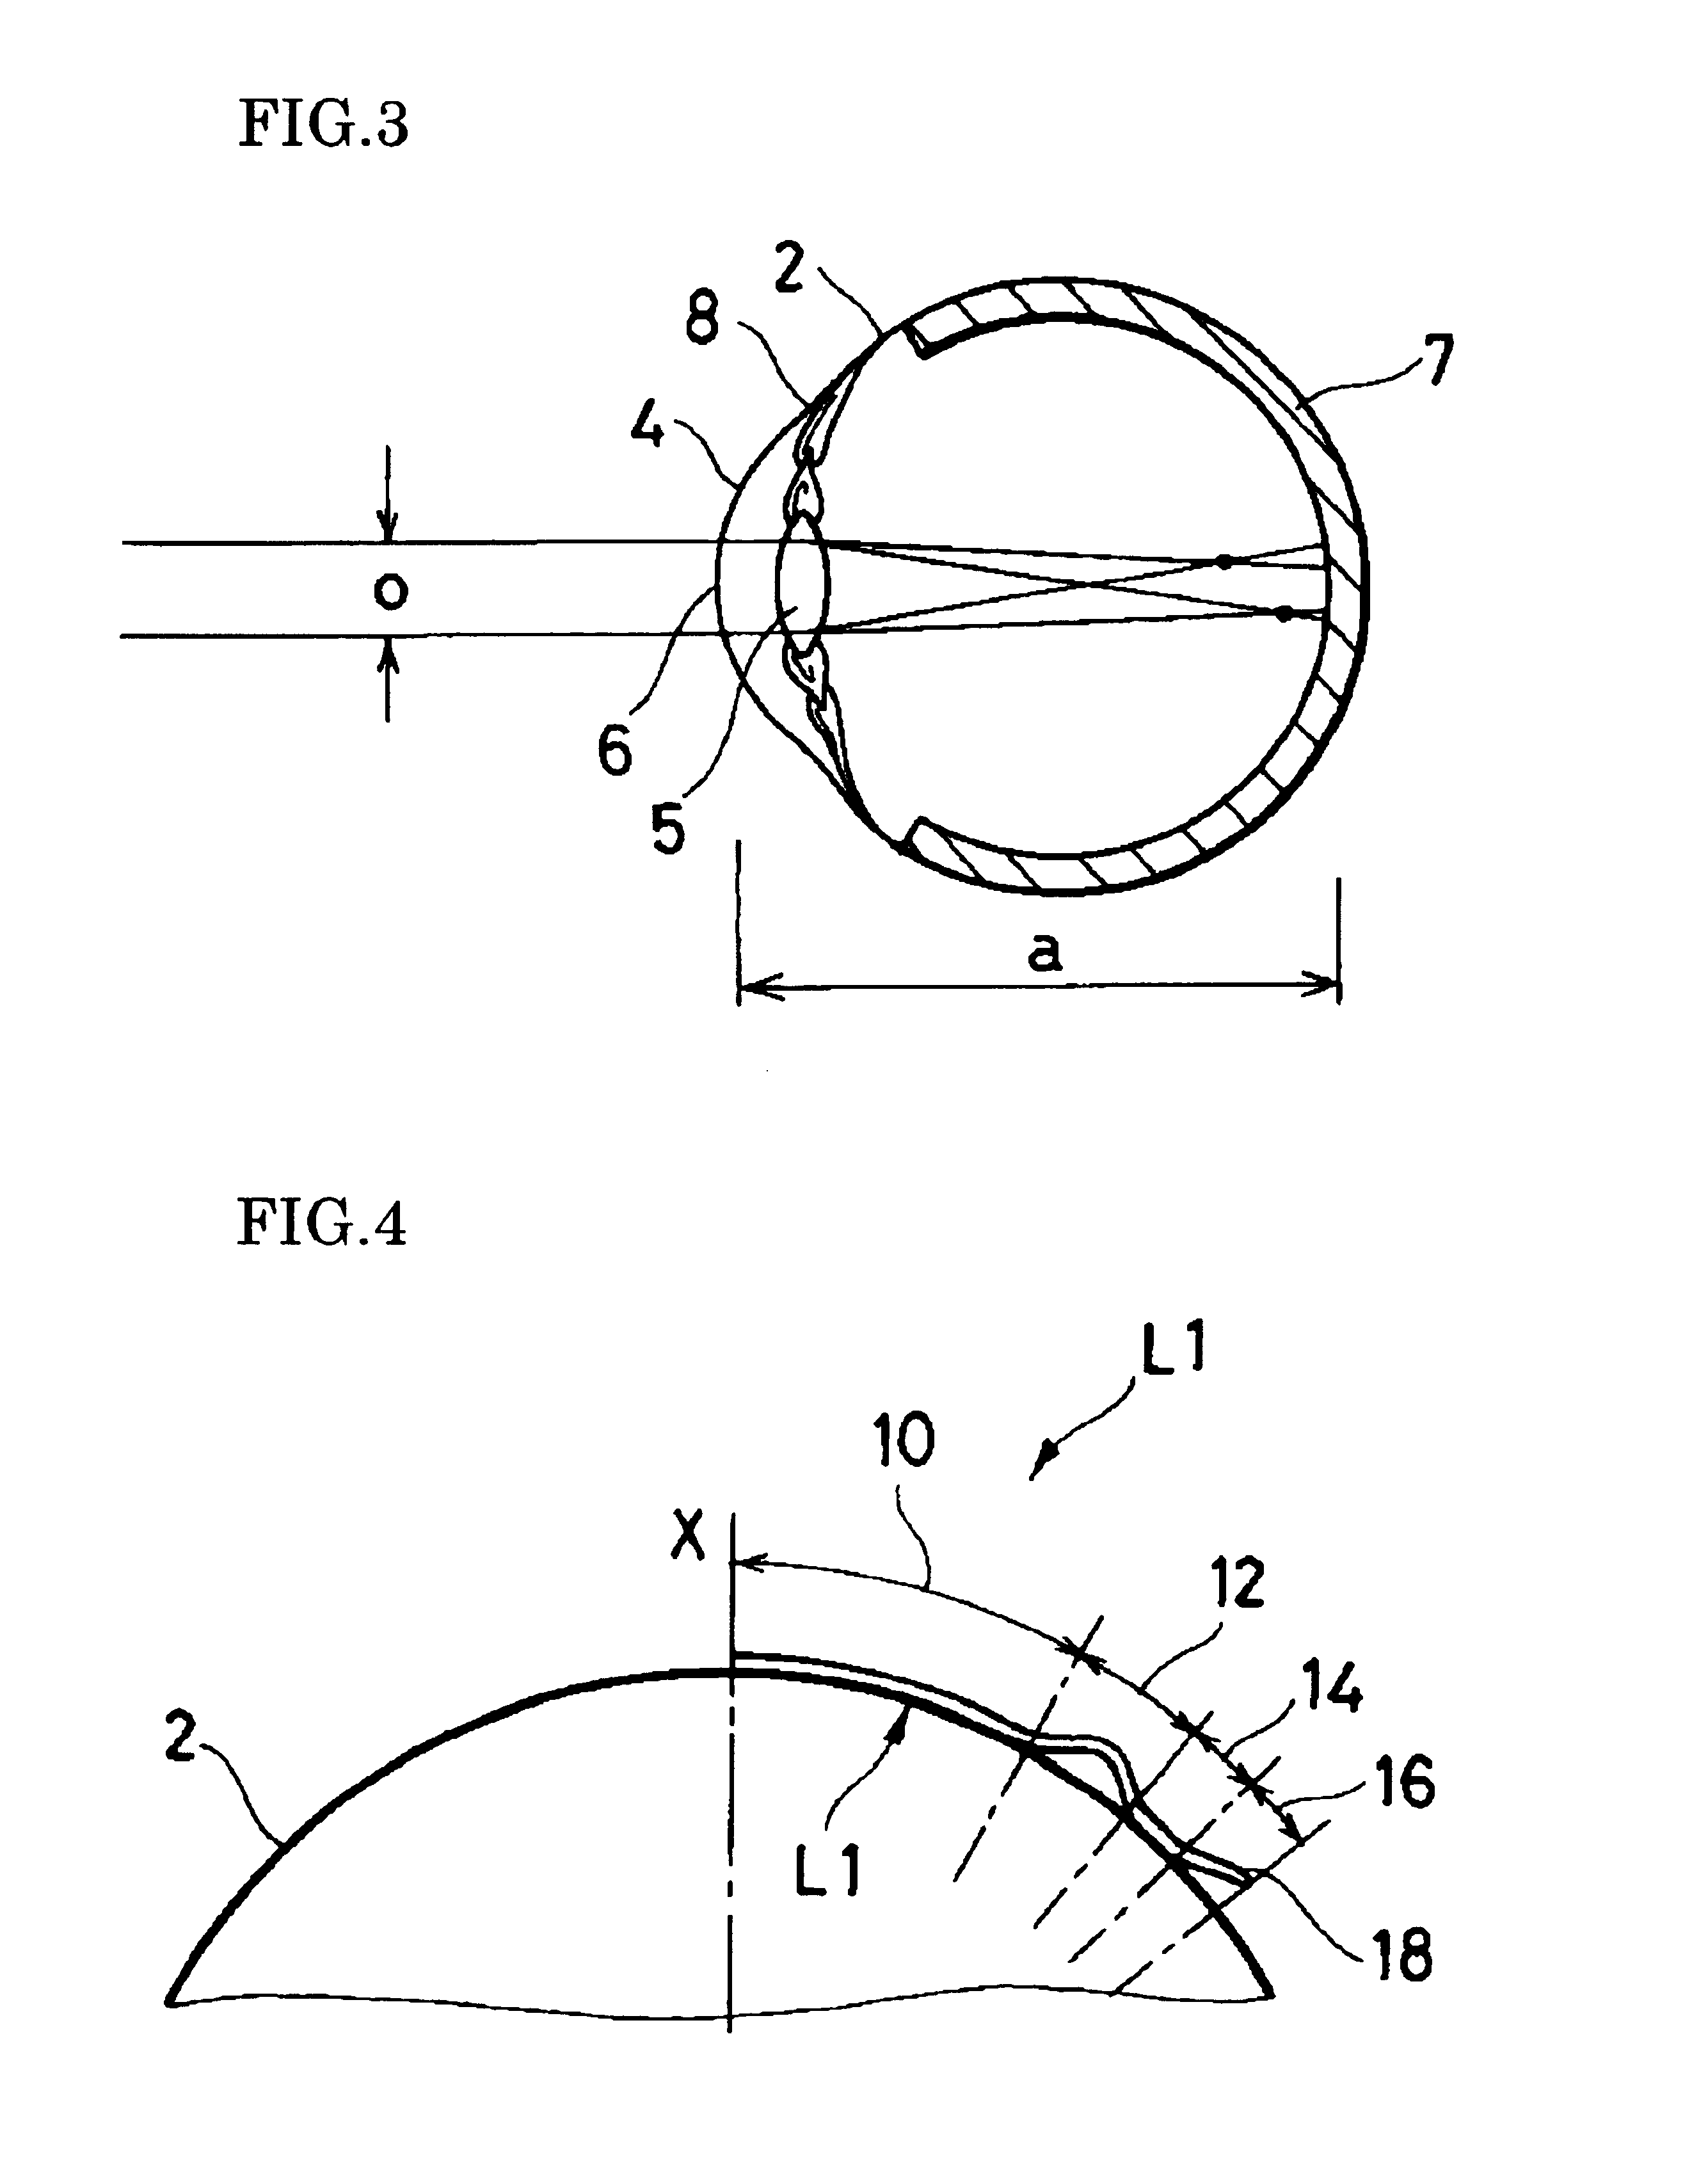 Contact lens for correcting myopia and/or astigmatism